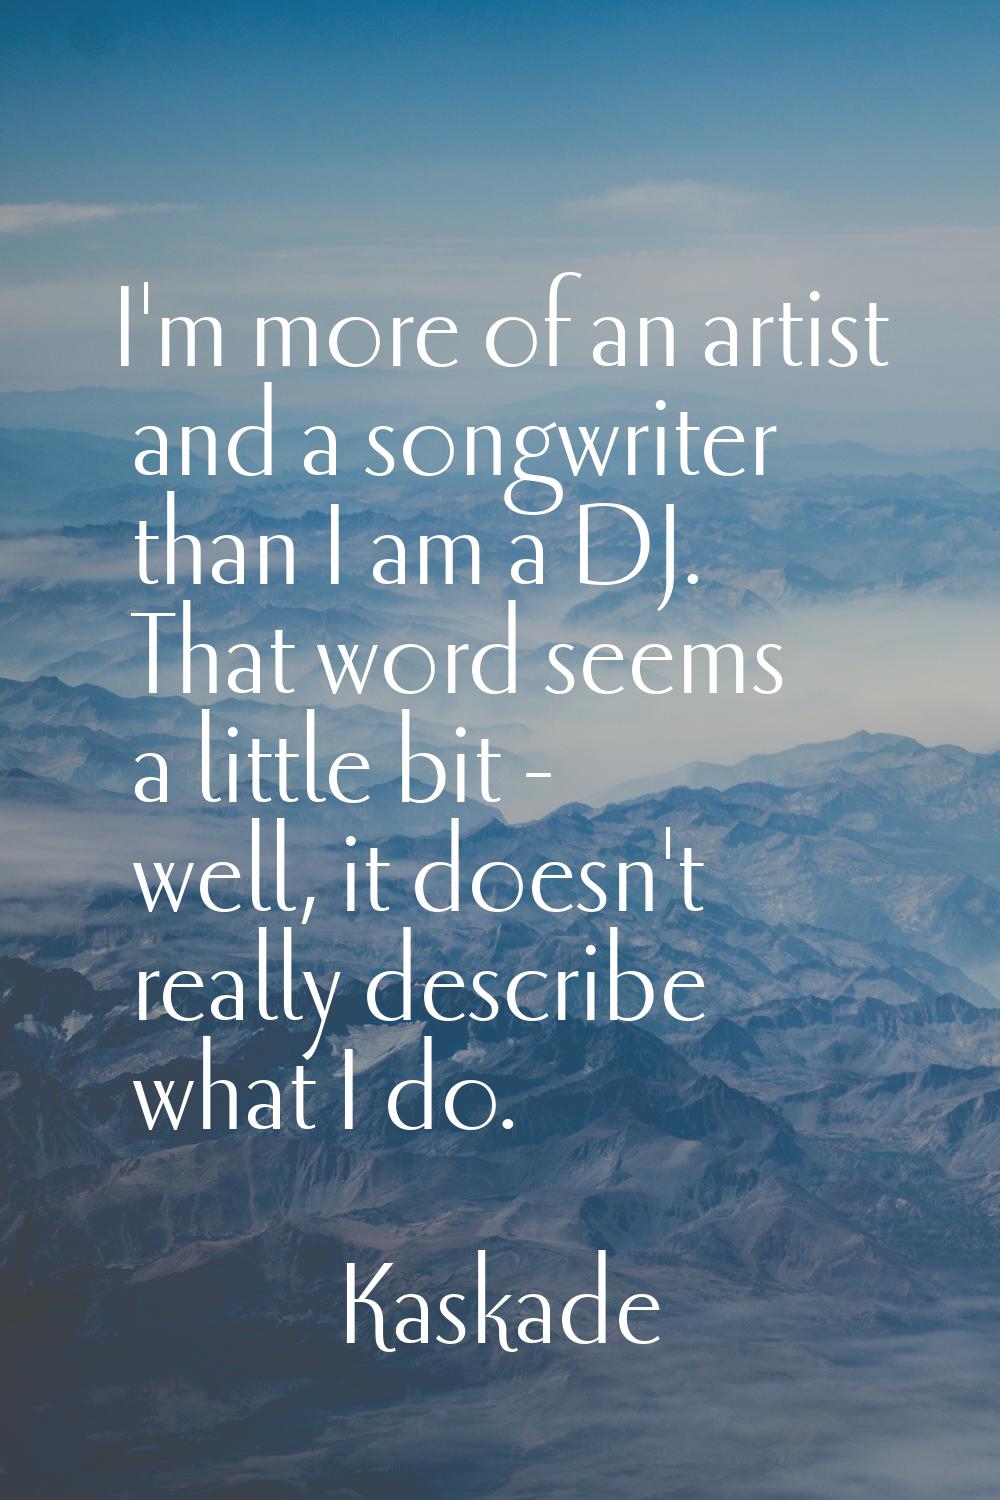 I'm more of an artist and a songwriter than I am a DJ. That word seems a little bit - well, it does